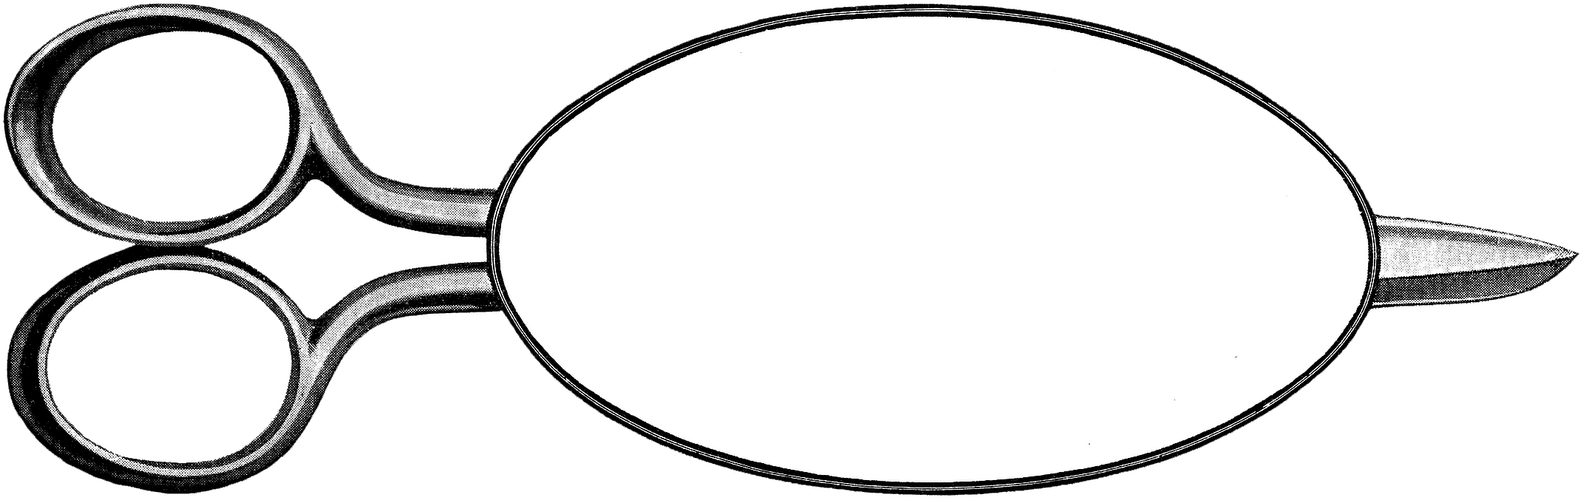 A White Oval Object With Black Border